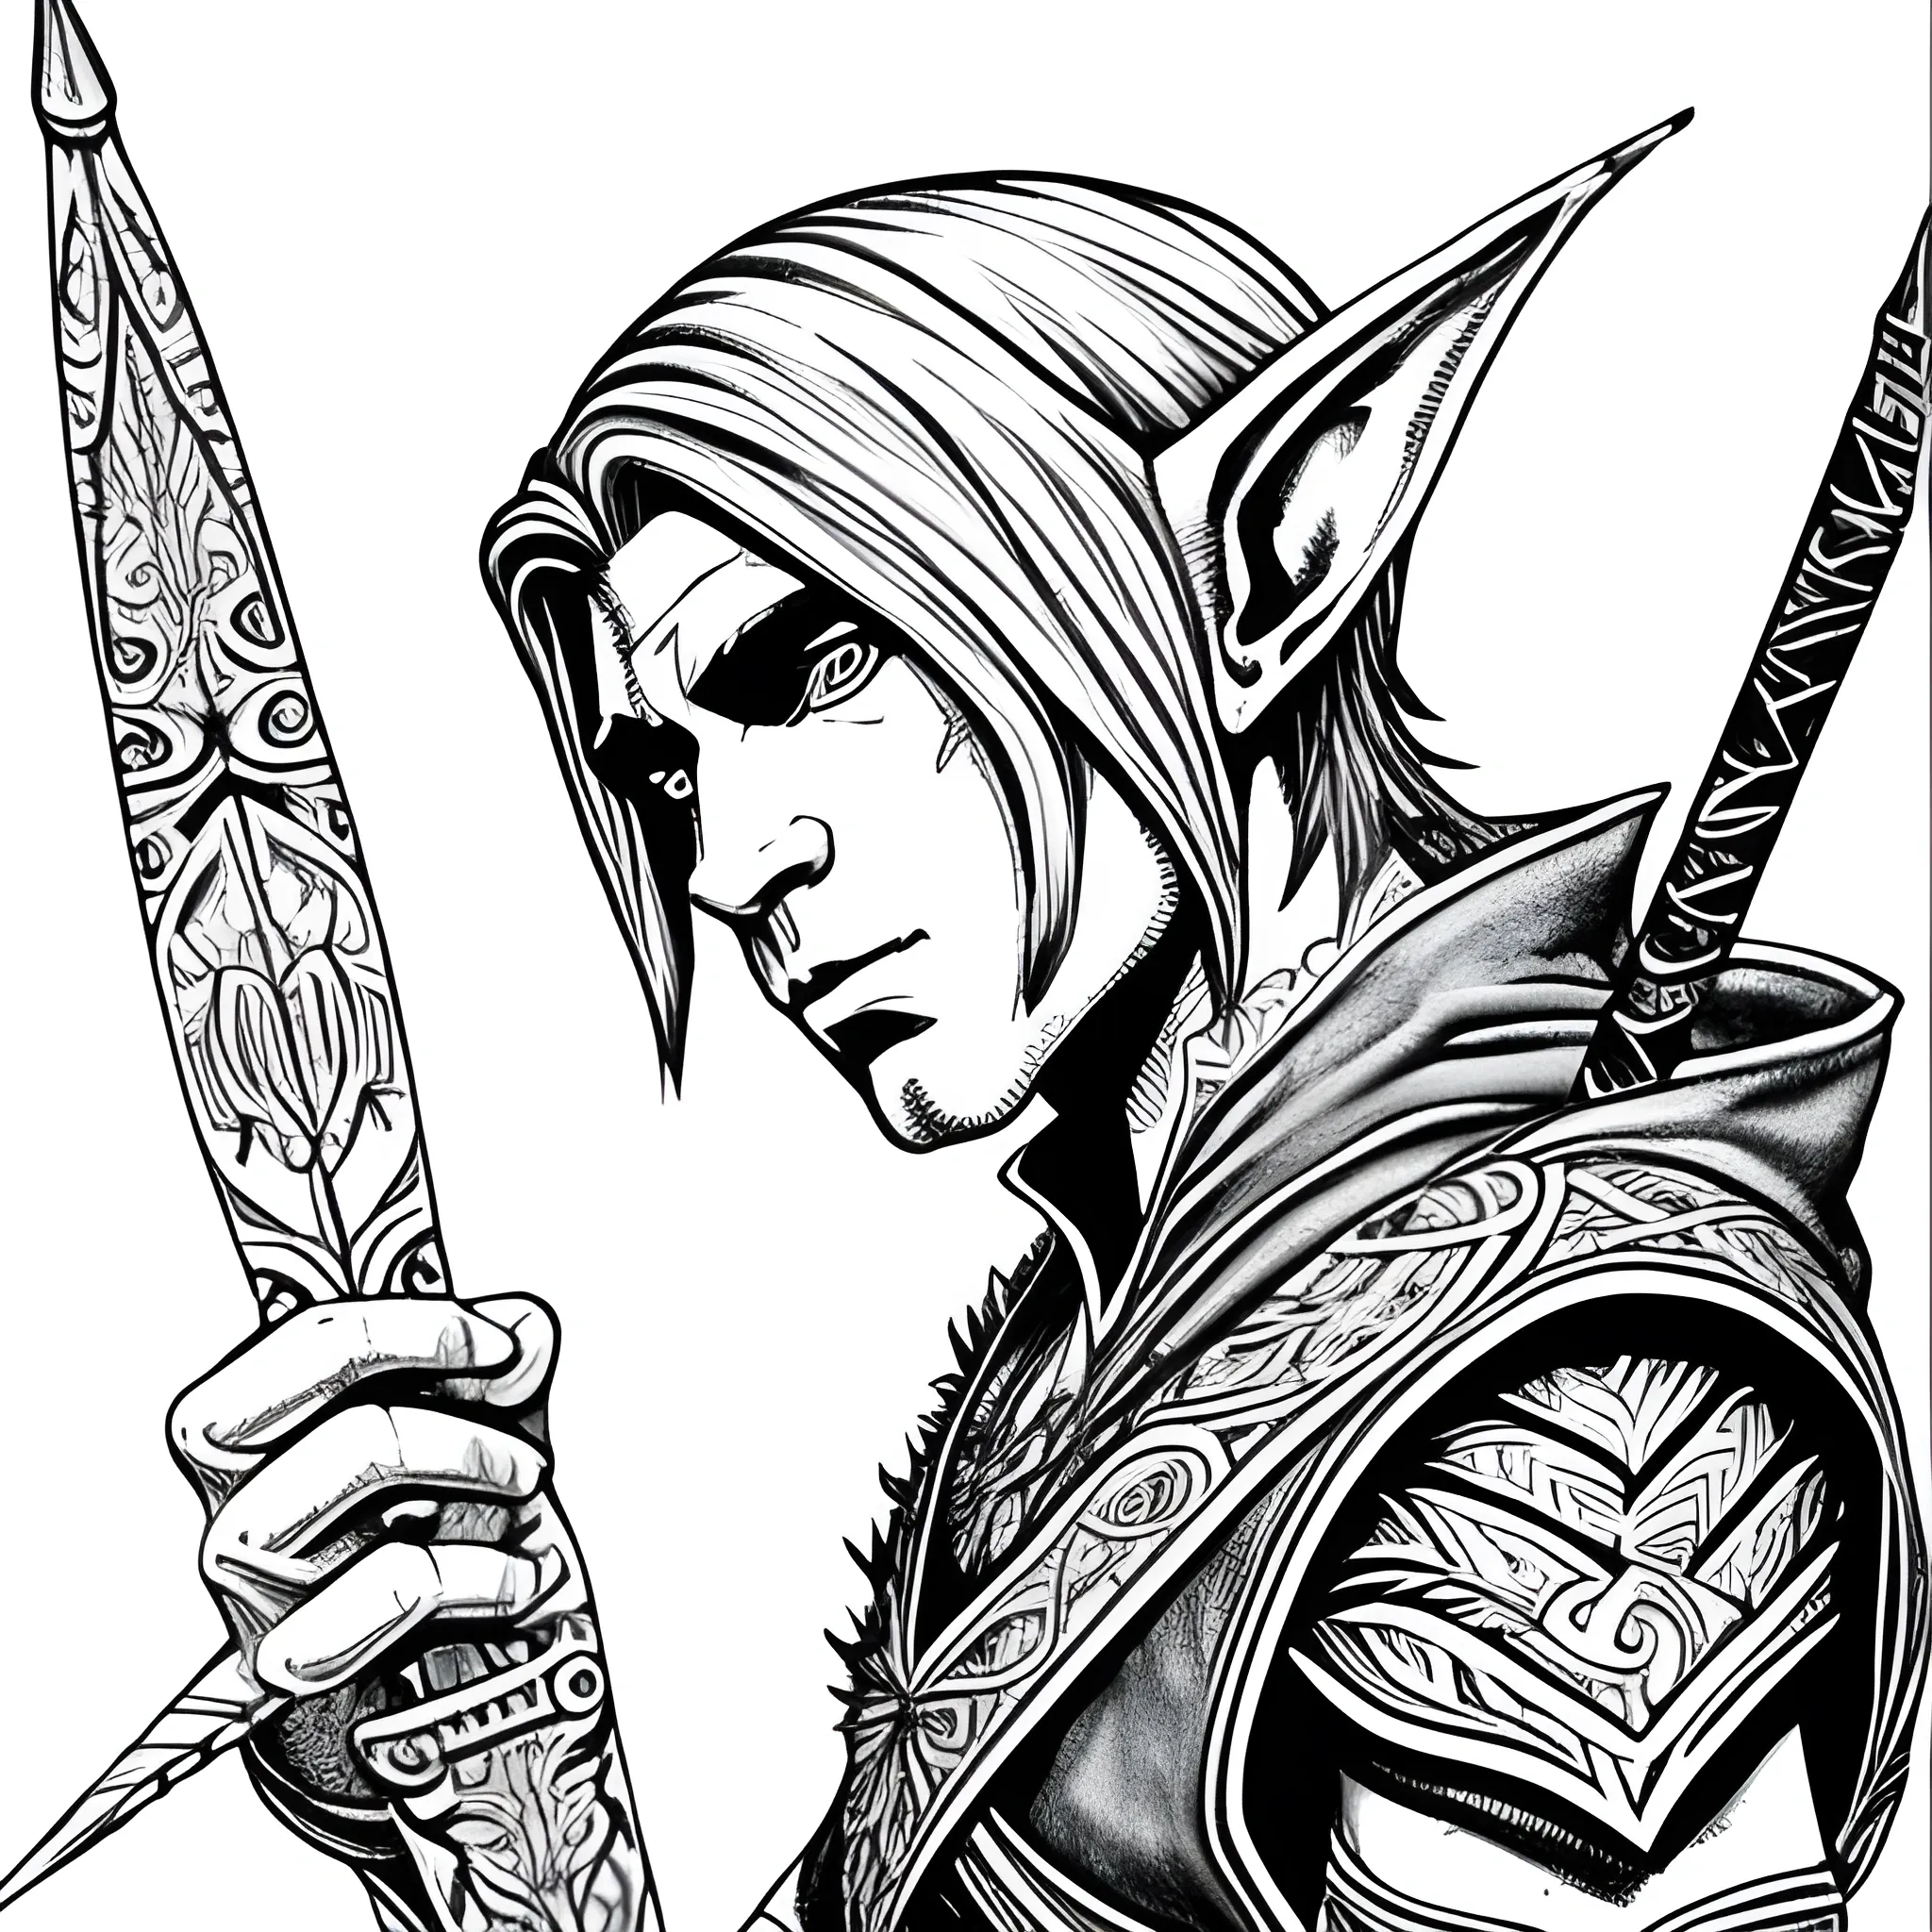 Fantasy, Sharpie Art, Male Elf, Ranger, Arch and arrow, Mage, Black and White,, Pencil Sketch, lineart